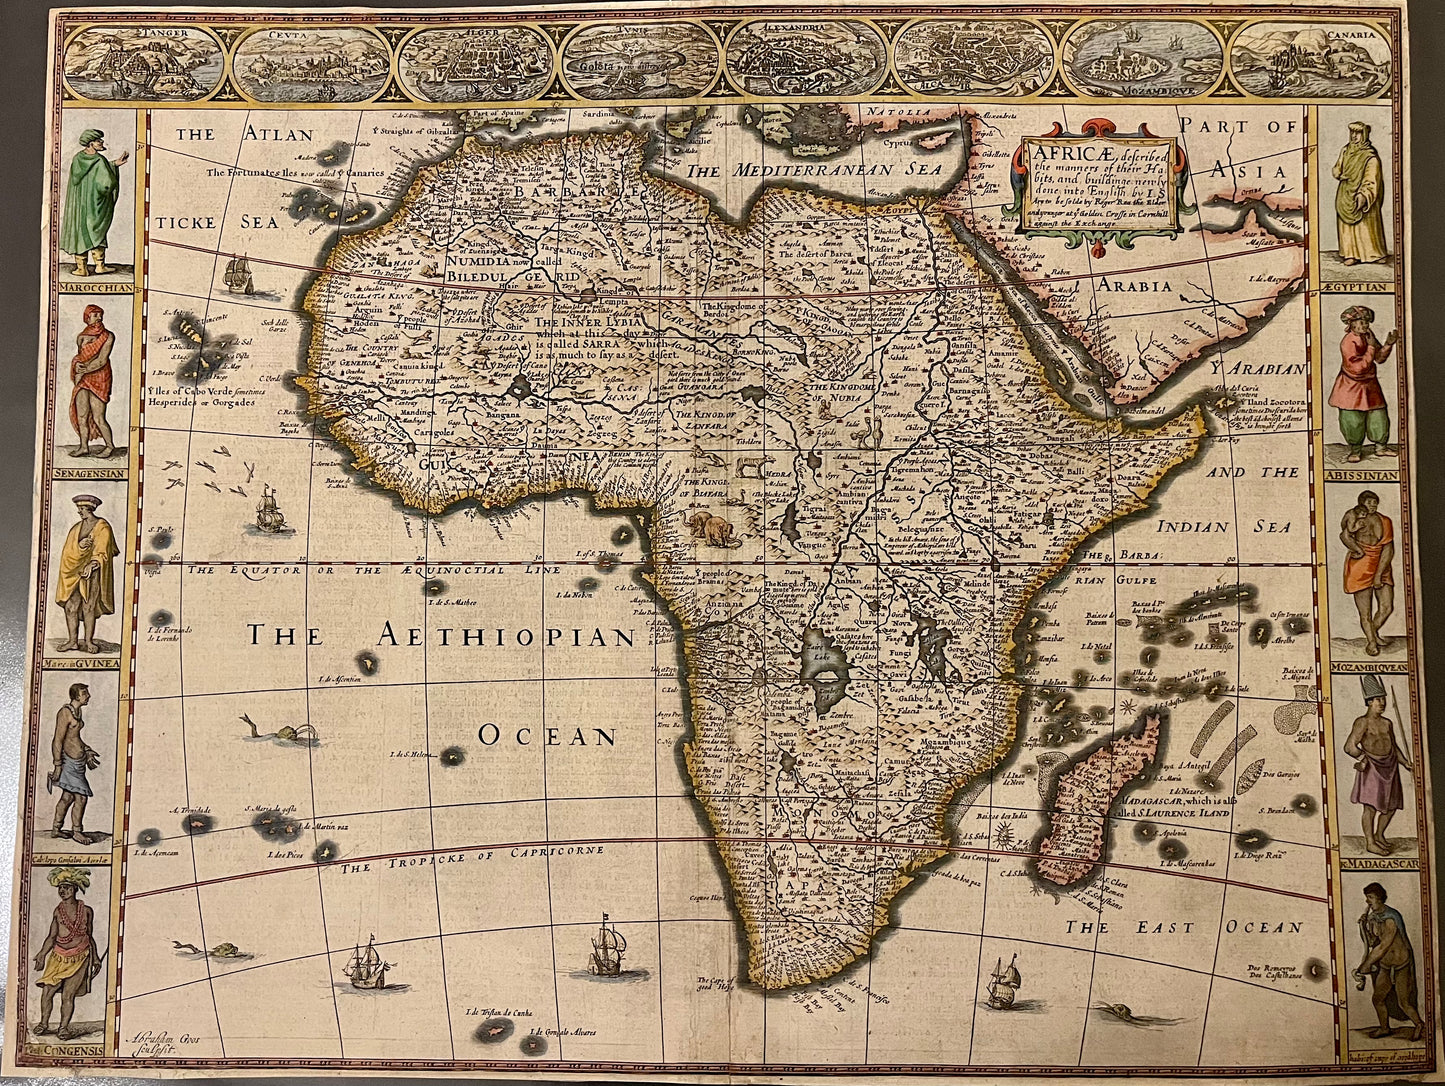 Africa - John Speed - 1665  "Africae, Described. The manners of their Habits and buildings newly done into English by I.S" - rare Roger Rae Edition.